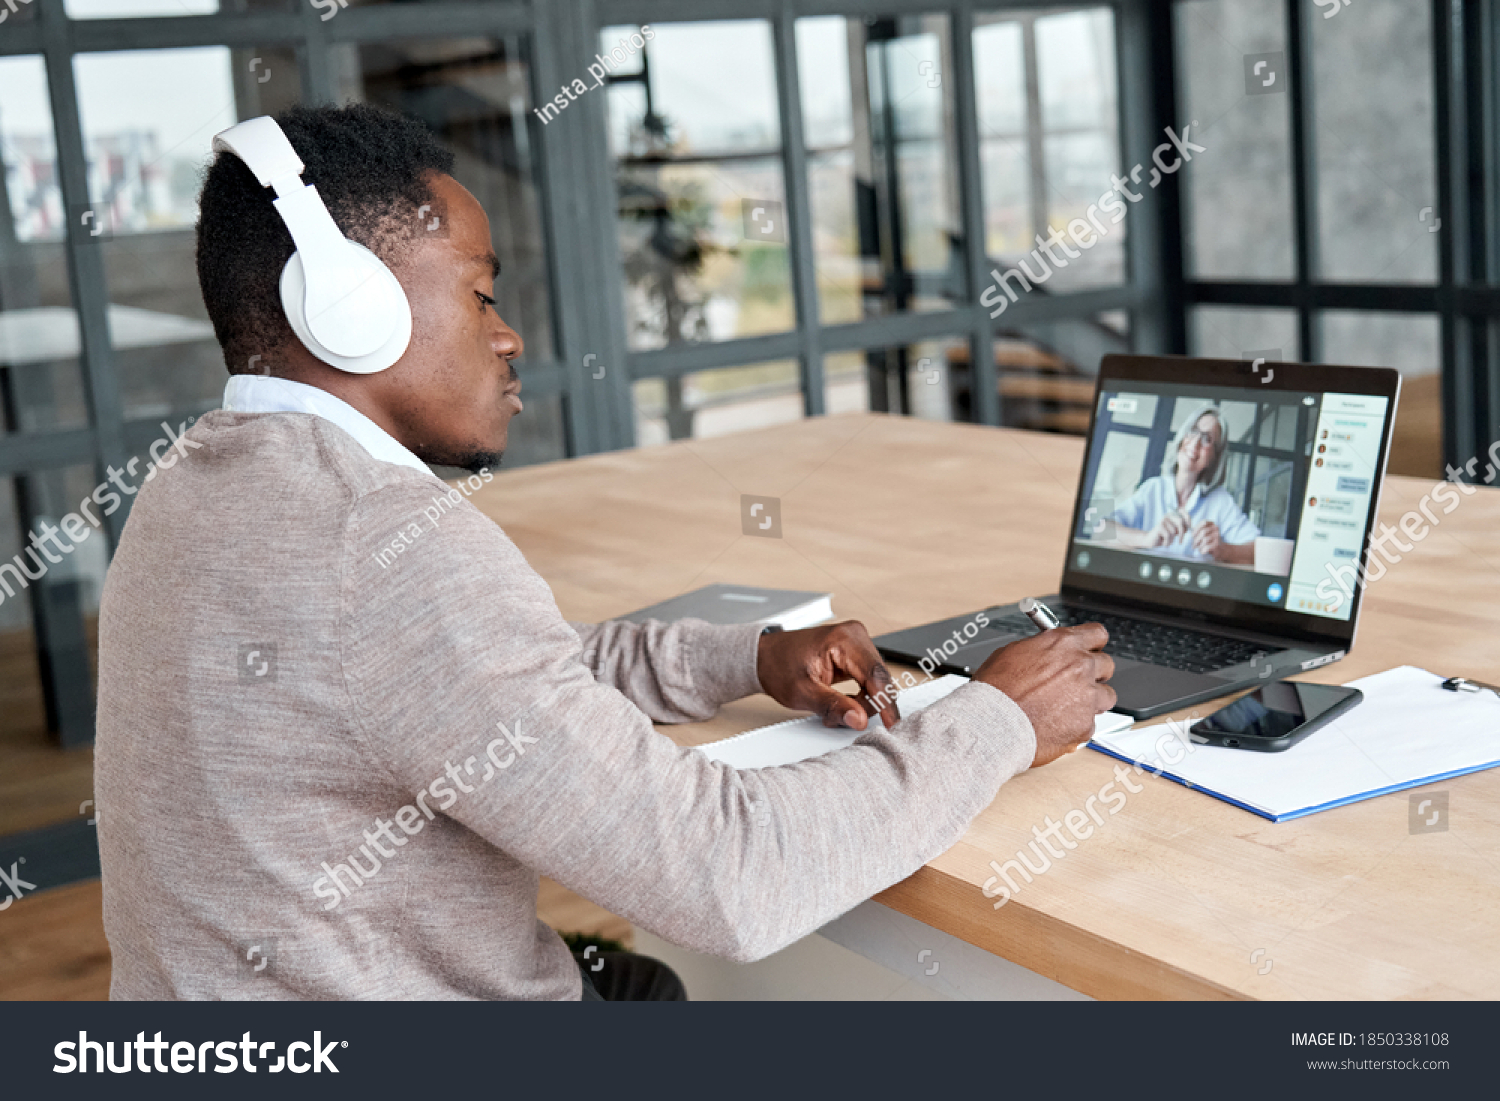 Serious african business man or black male student wearing headphones conference video calling, watching webinar online, social distance learning or working using laptop at home office, taking notes. #1850338108